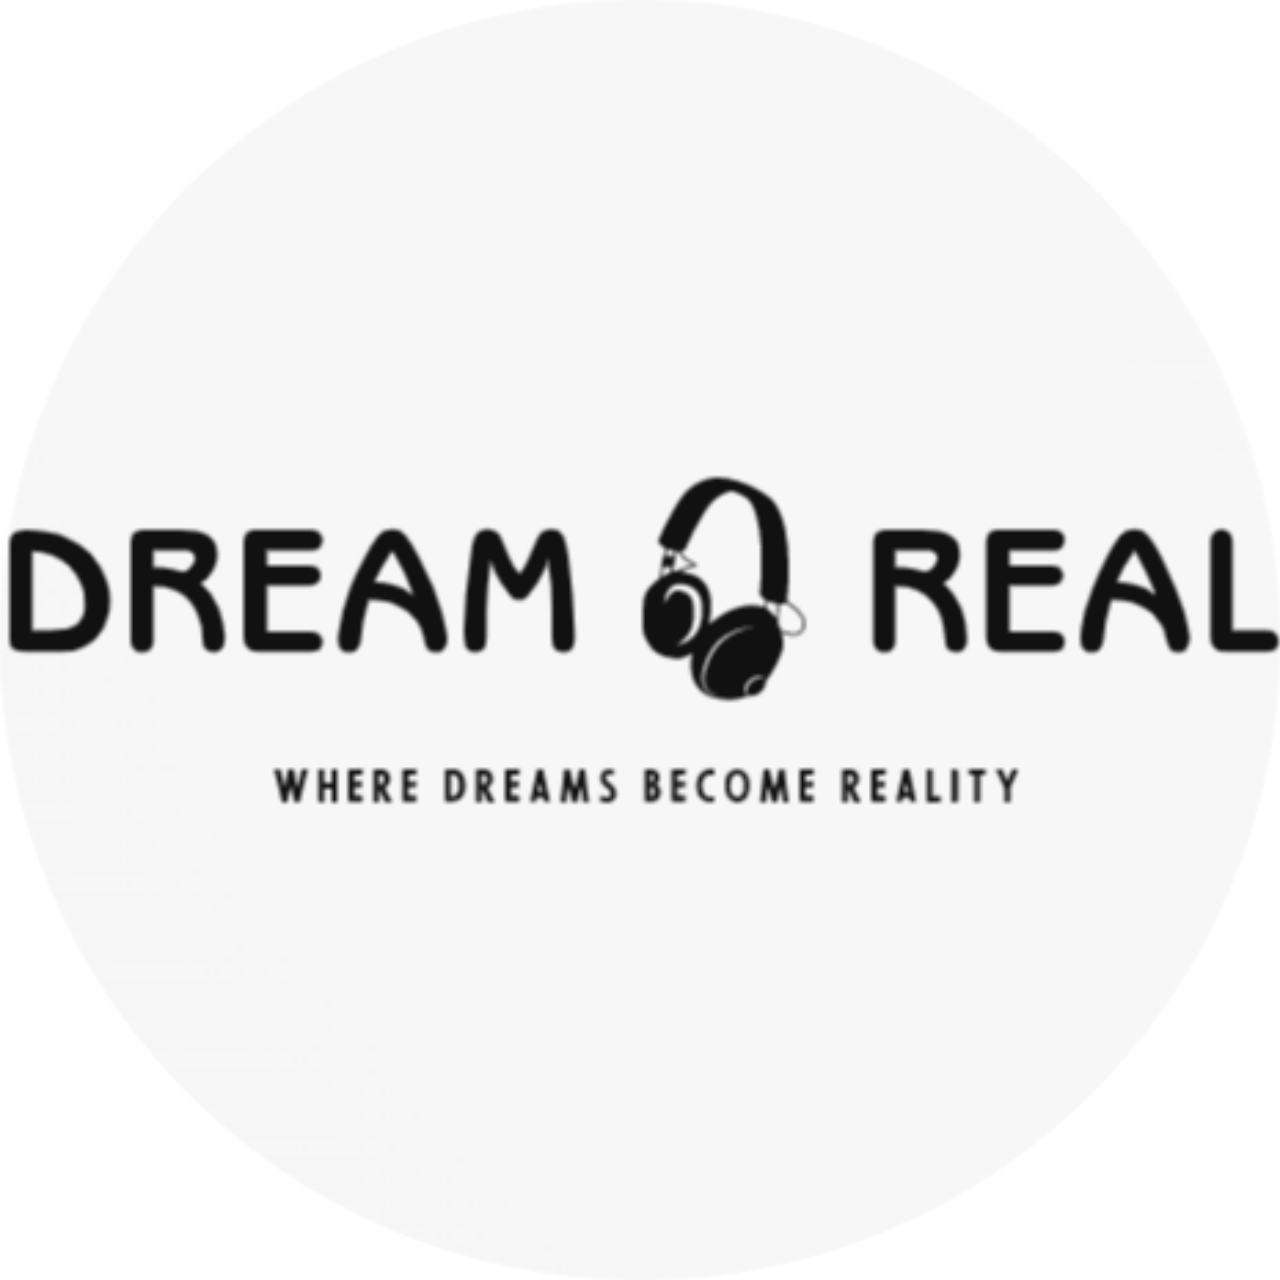 DREAM R REAL's web page